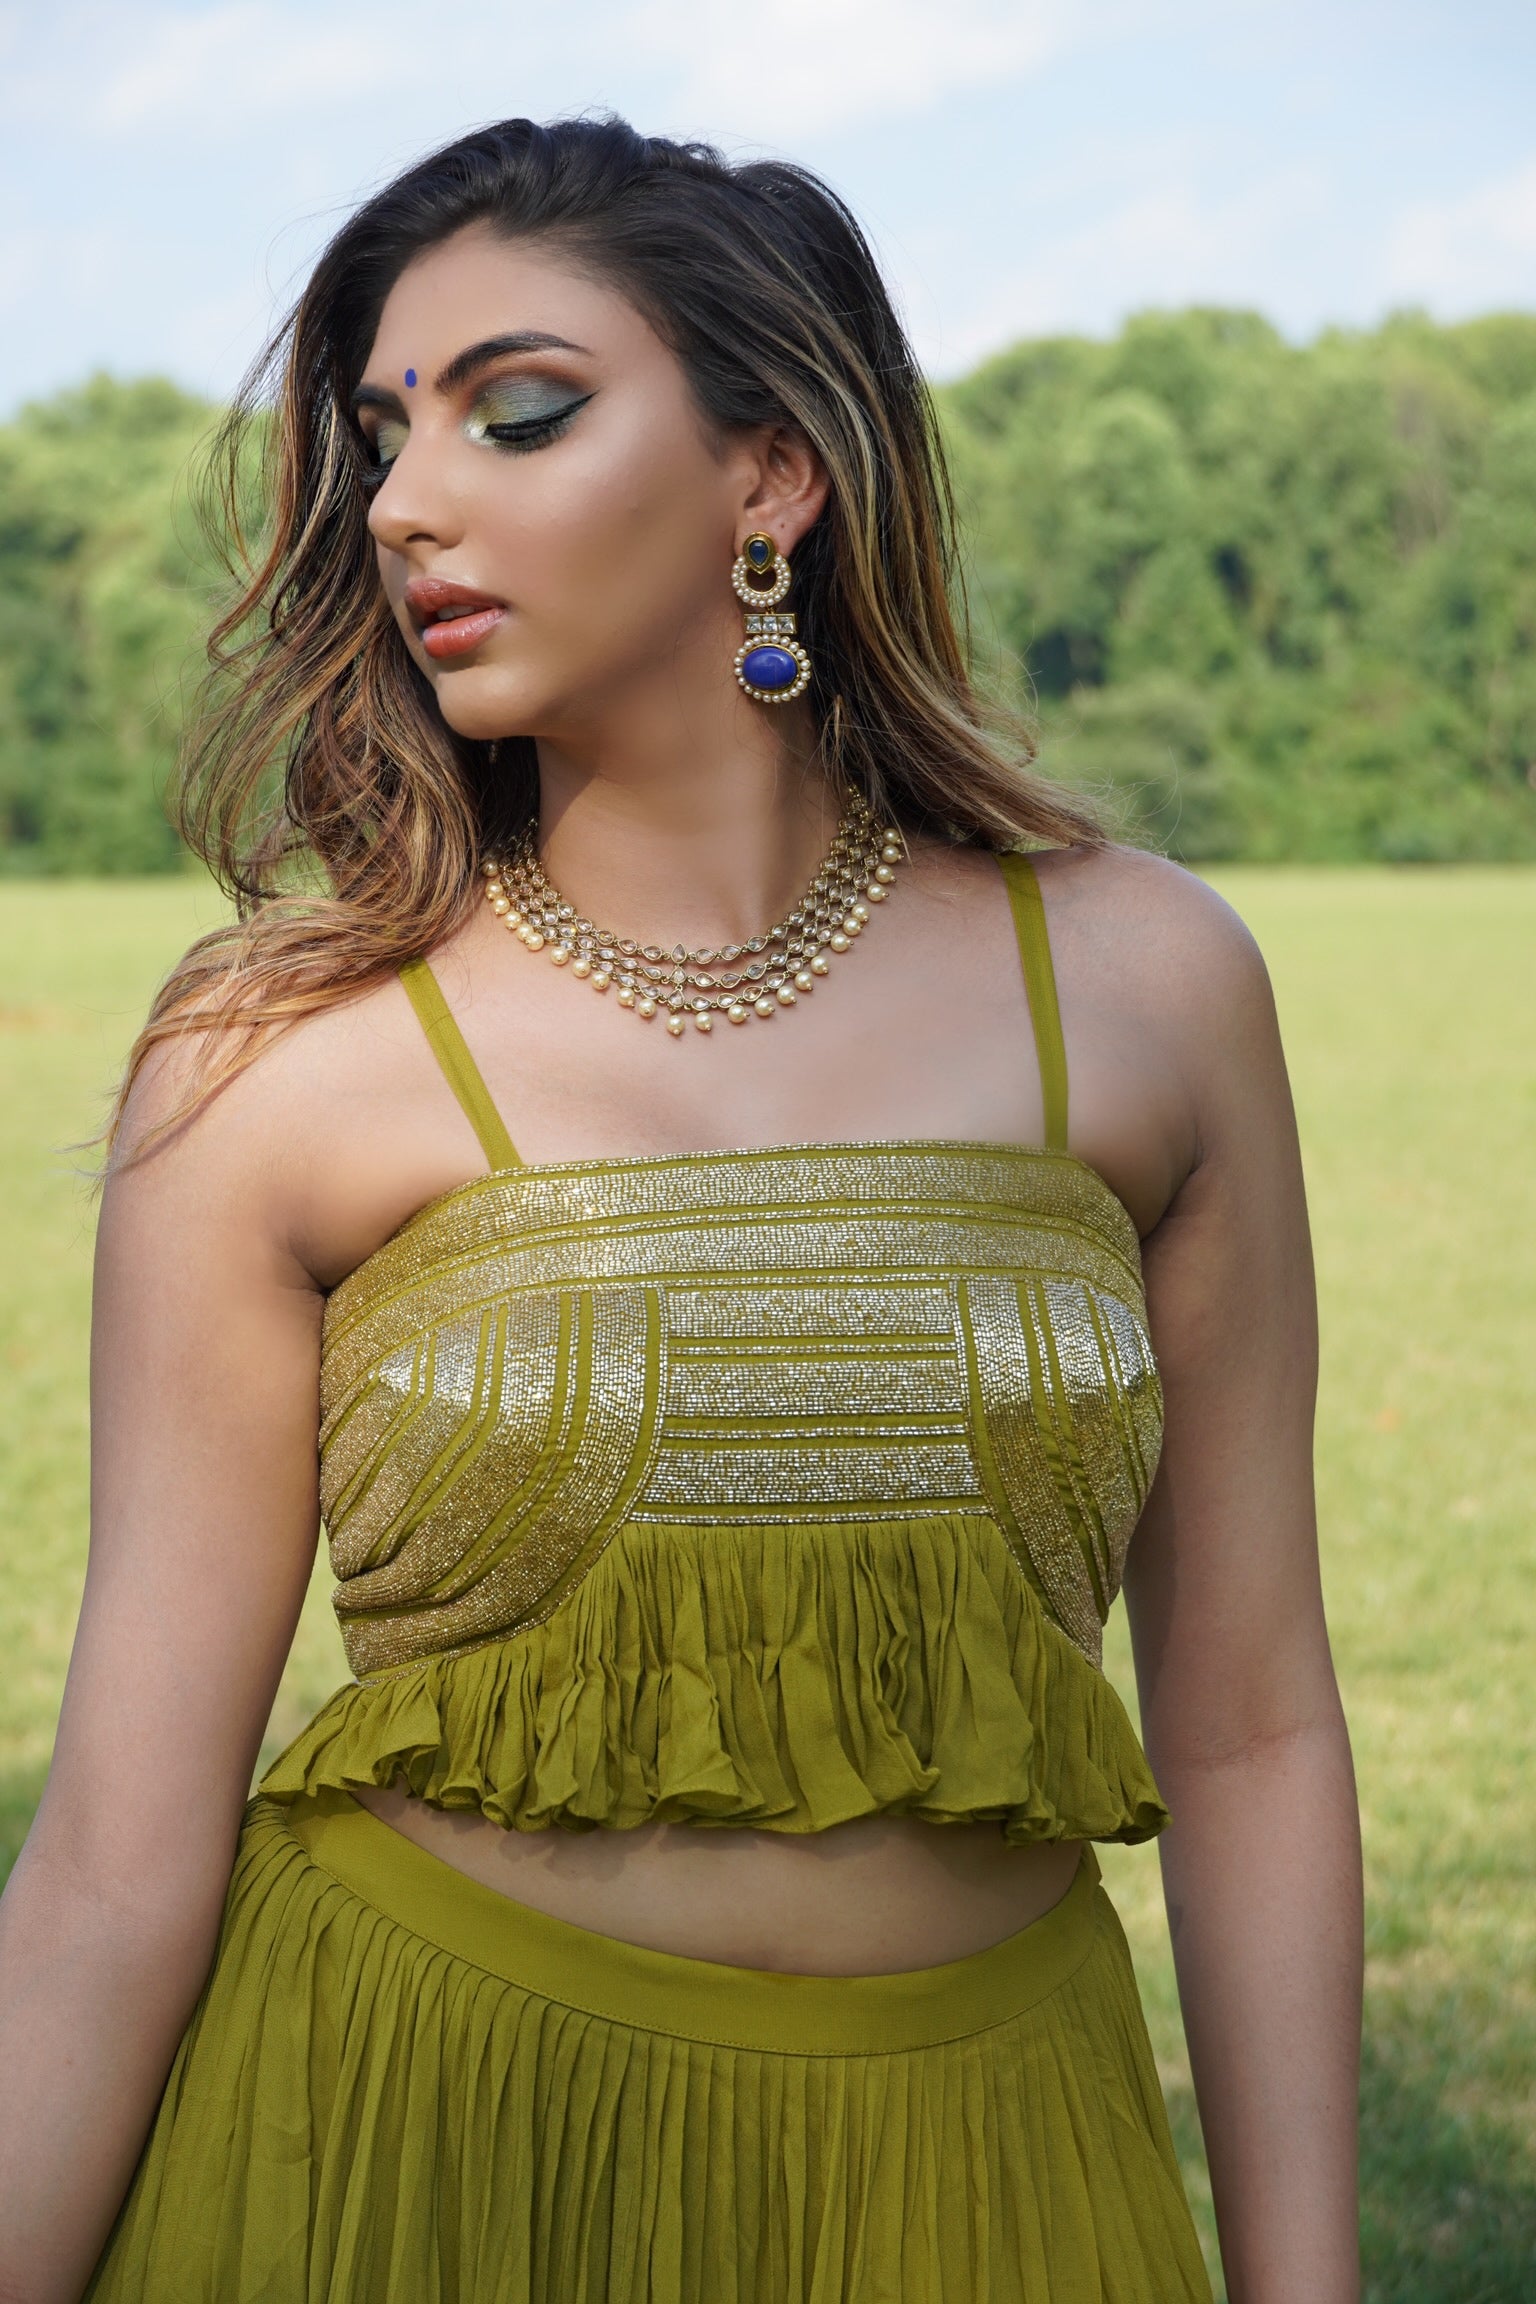 Olive Green Co-ord Set of Spagetti Ruffle Blouse And Skirt - Buy Designer Indian Occasional Wear Outfits in USA - Sushma Patel